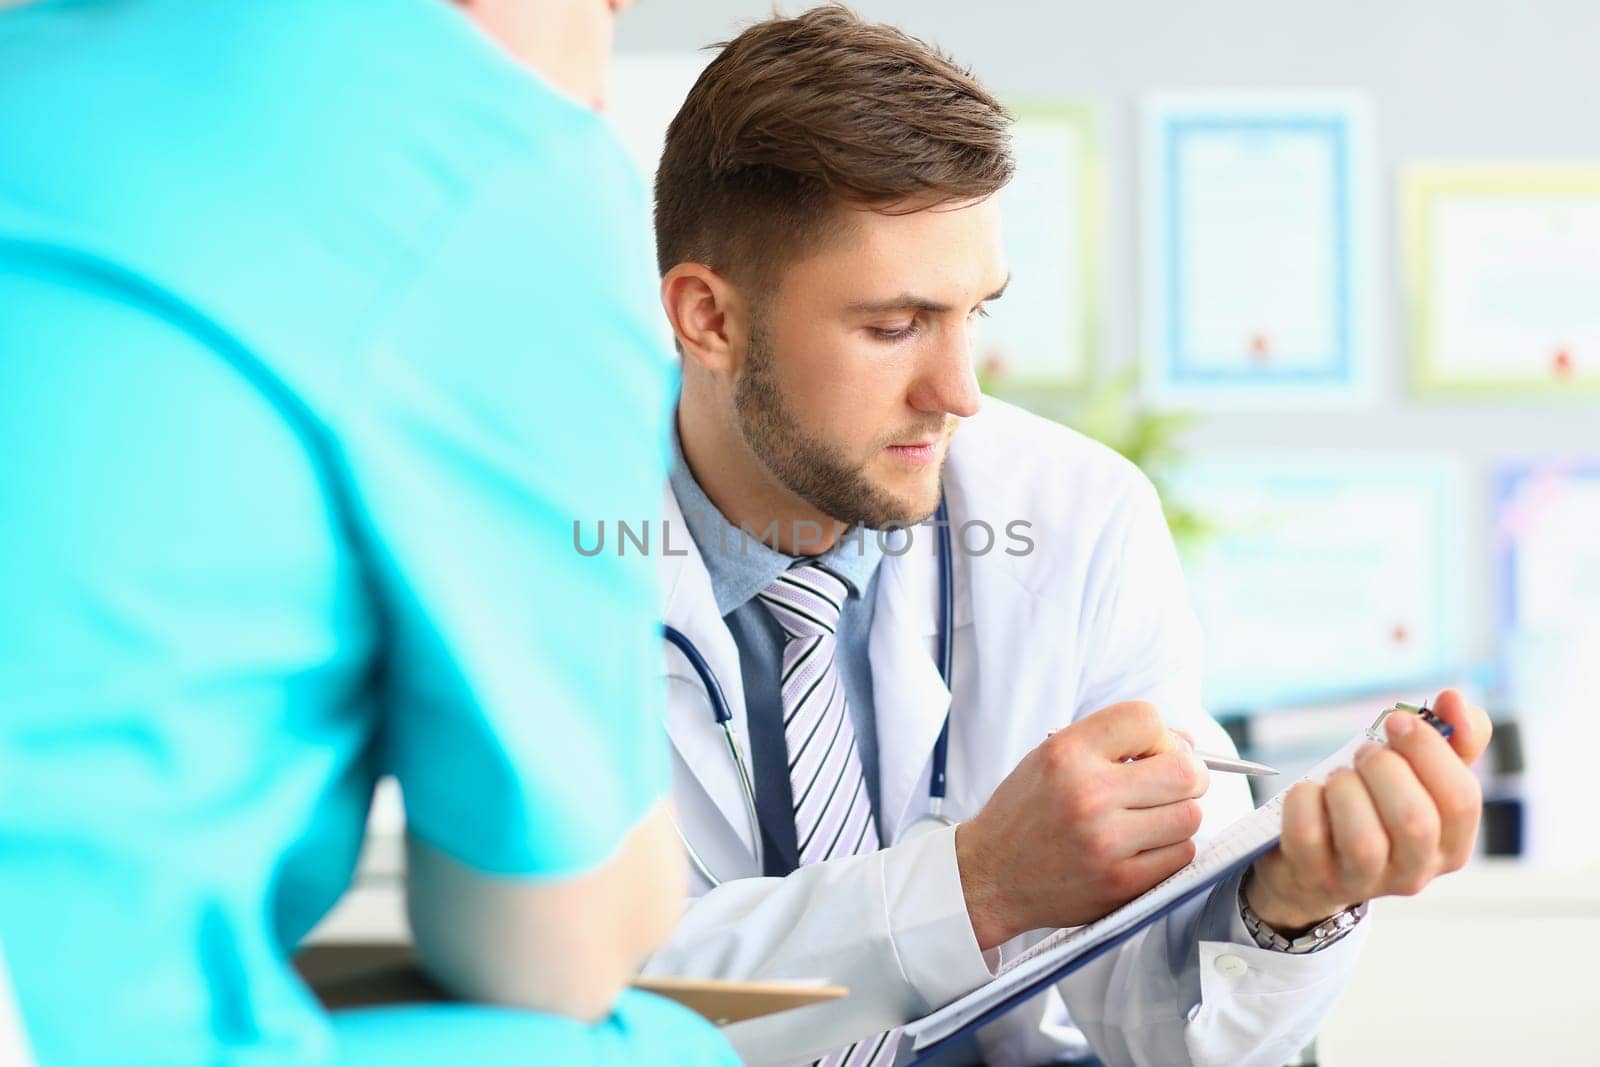 Male doctor looks at patient medical record in clinic. Medical insurance examination and diagnosis concept